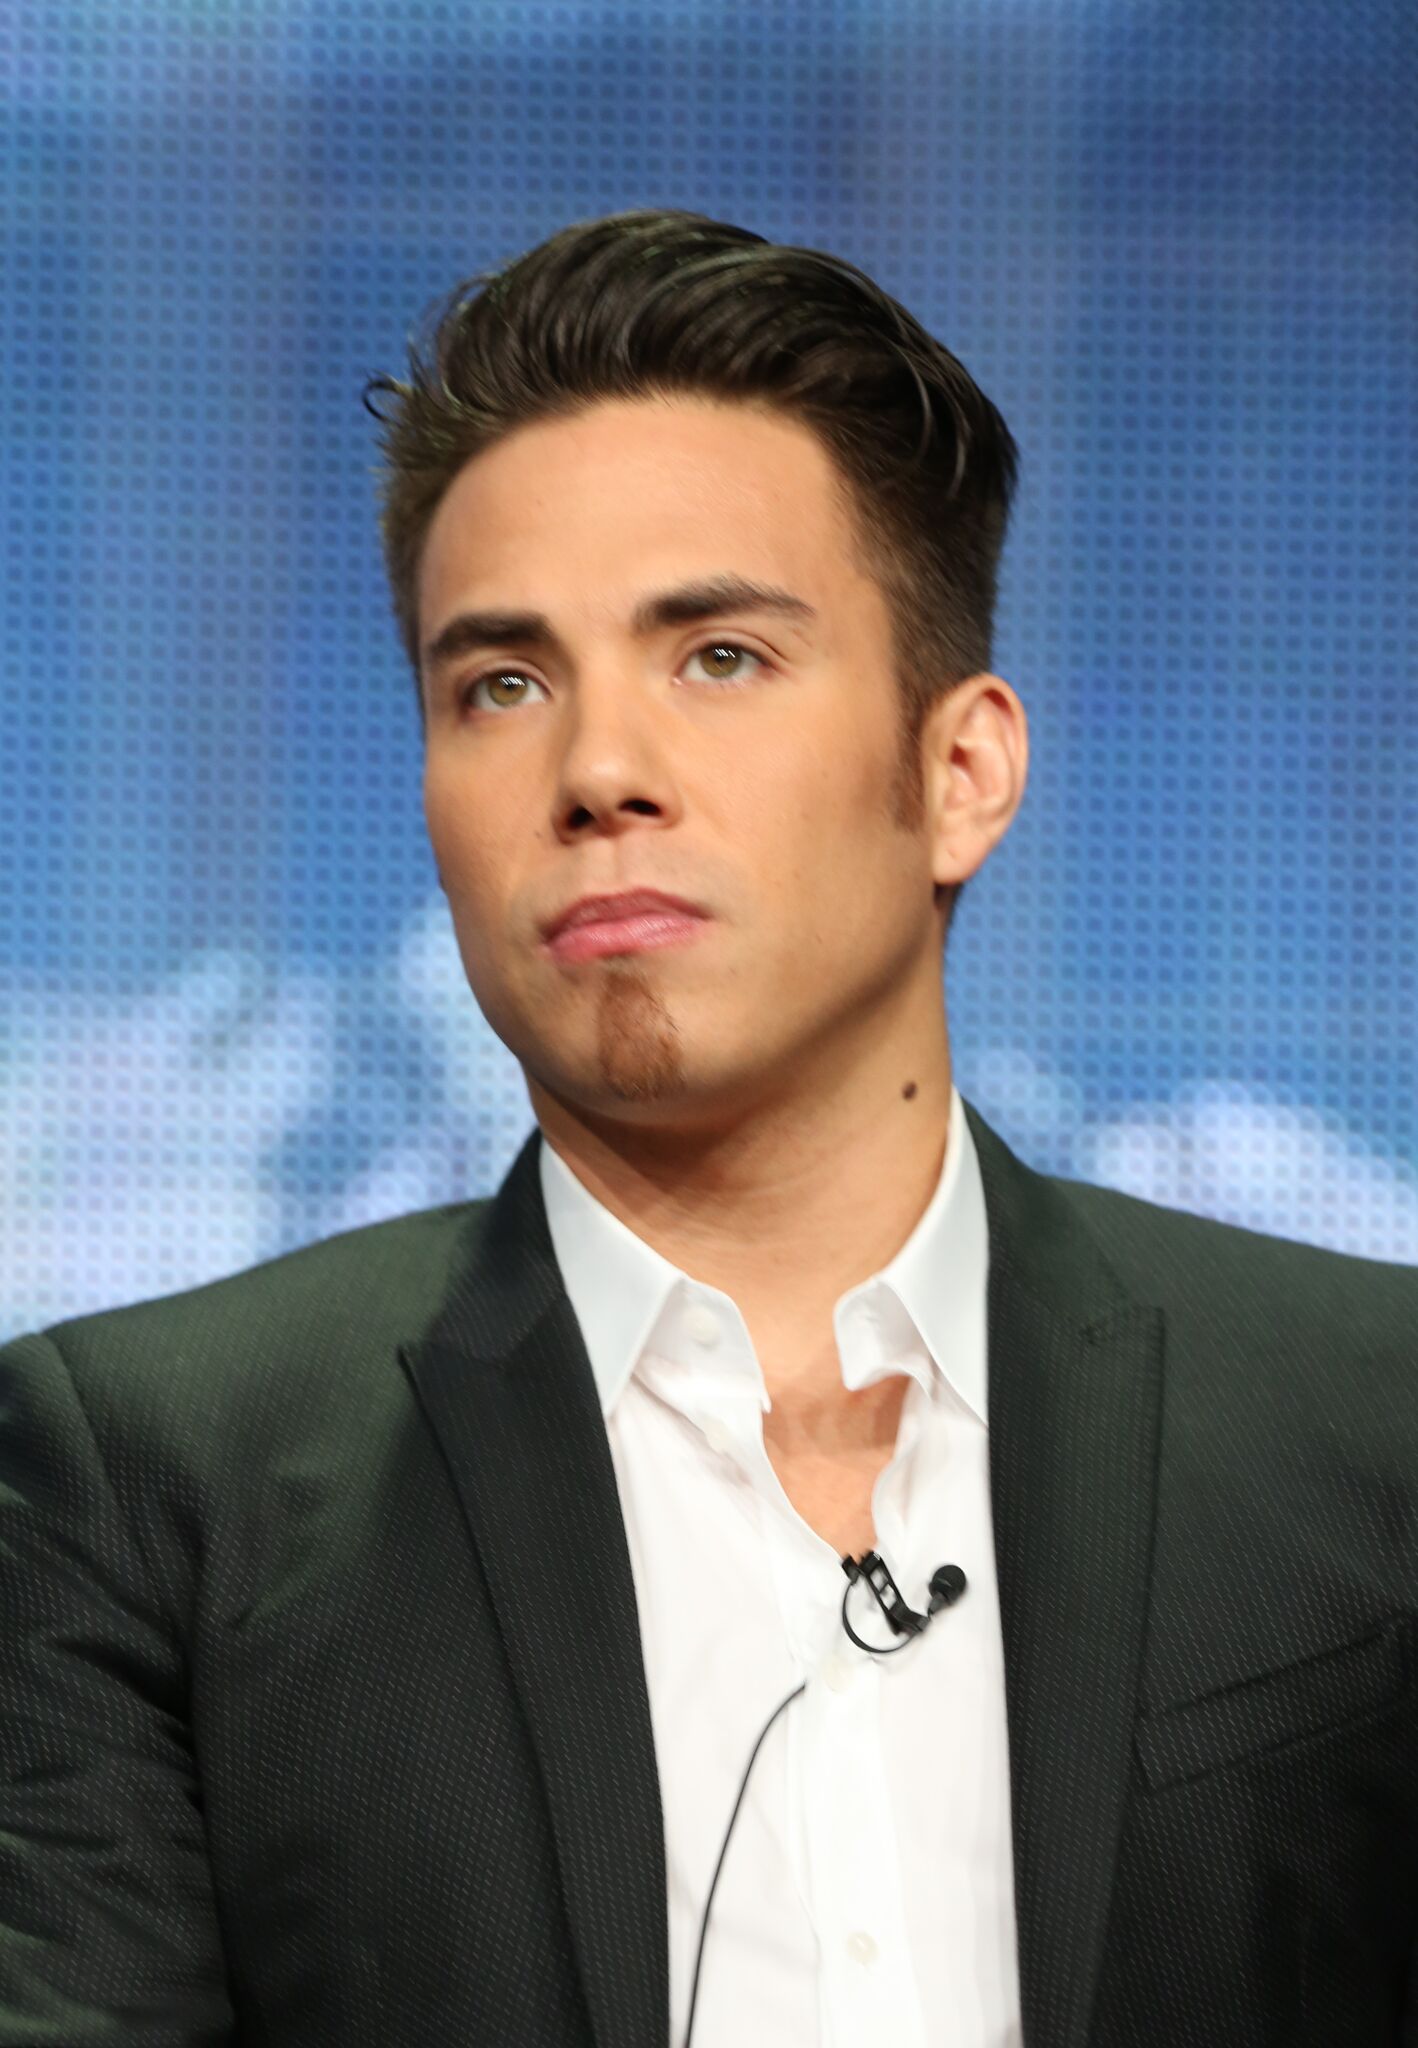 Top Rated 13 What is Apolo Ohno Net Worth 2022: Top Full Guide